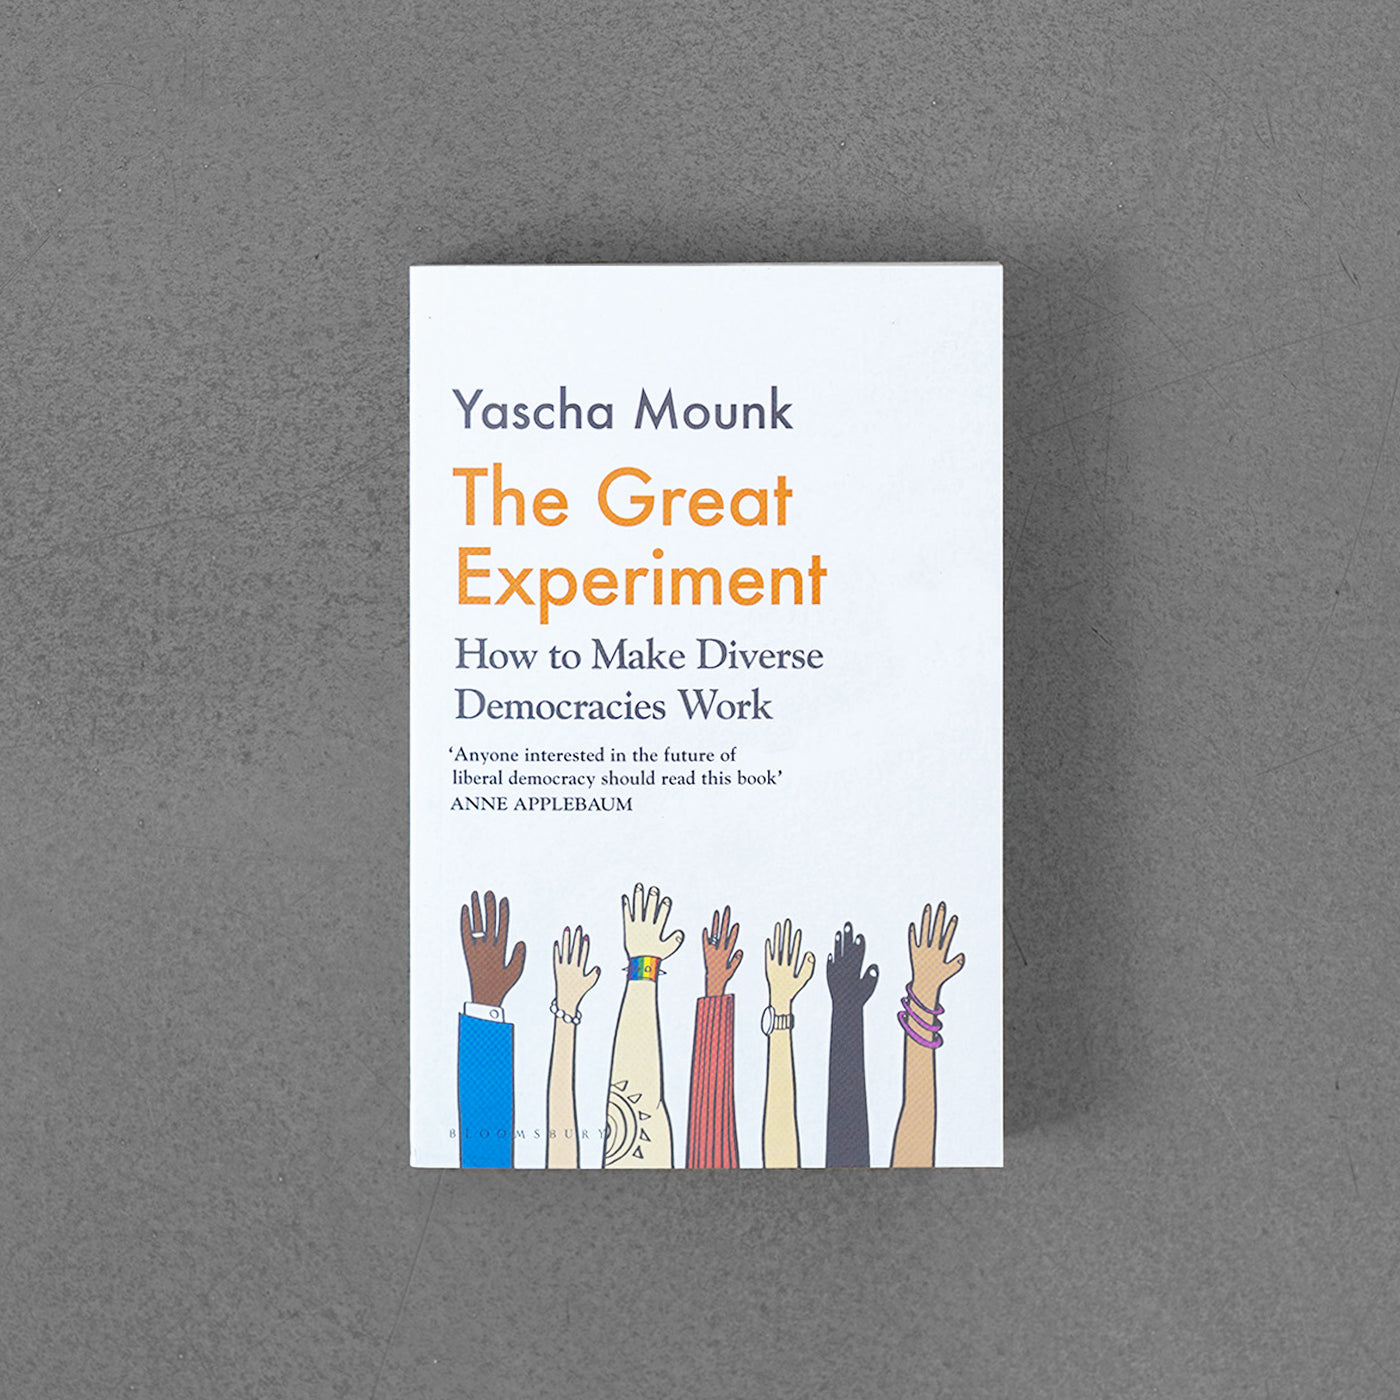 The Great Experiment: How to Make Diverse Democracies Work